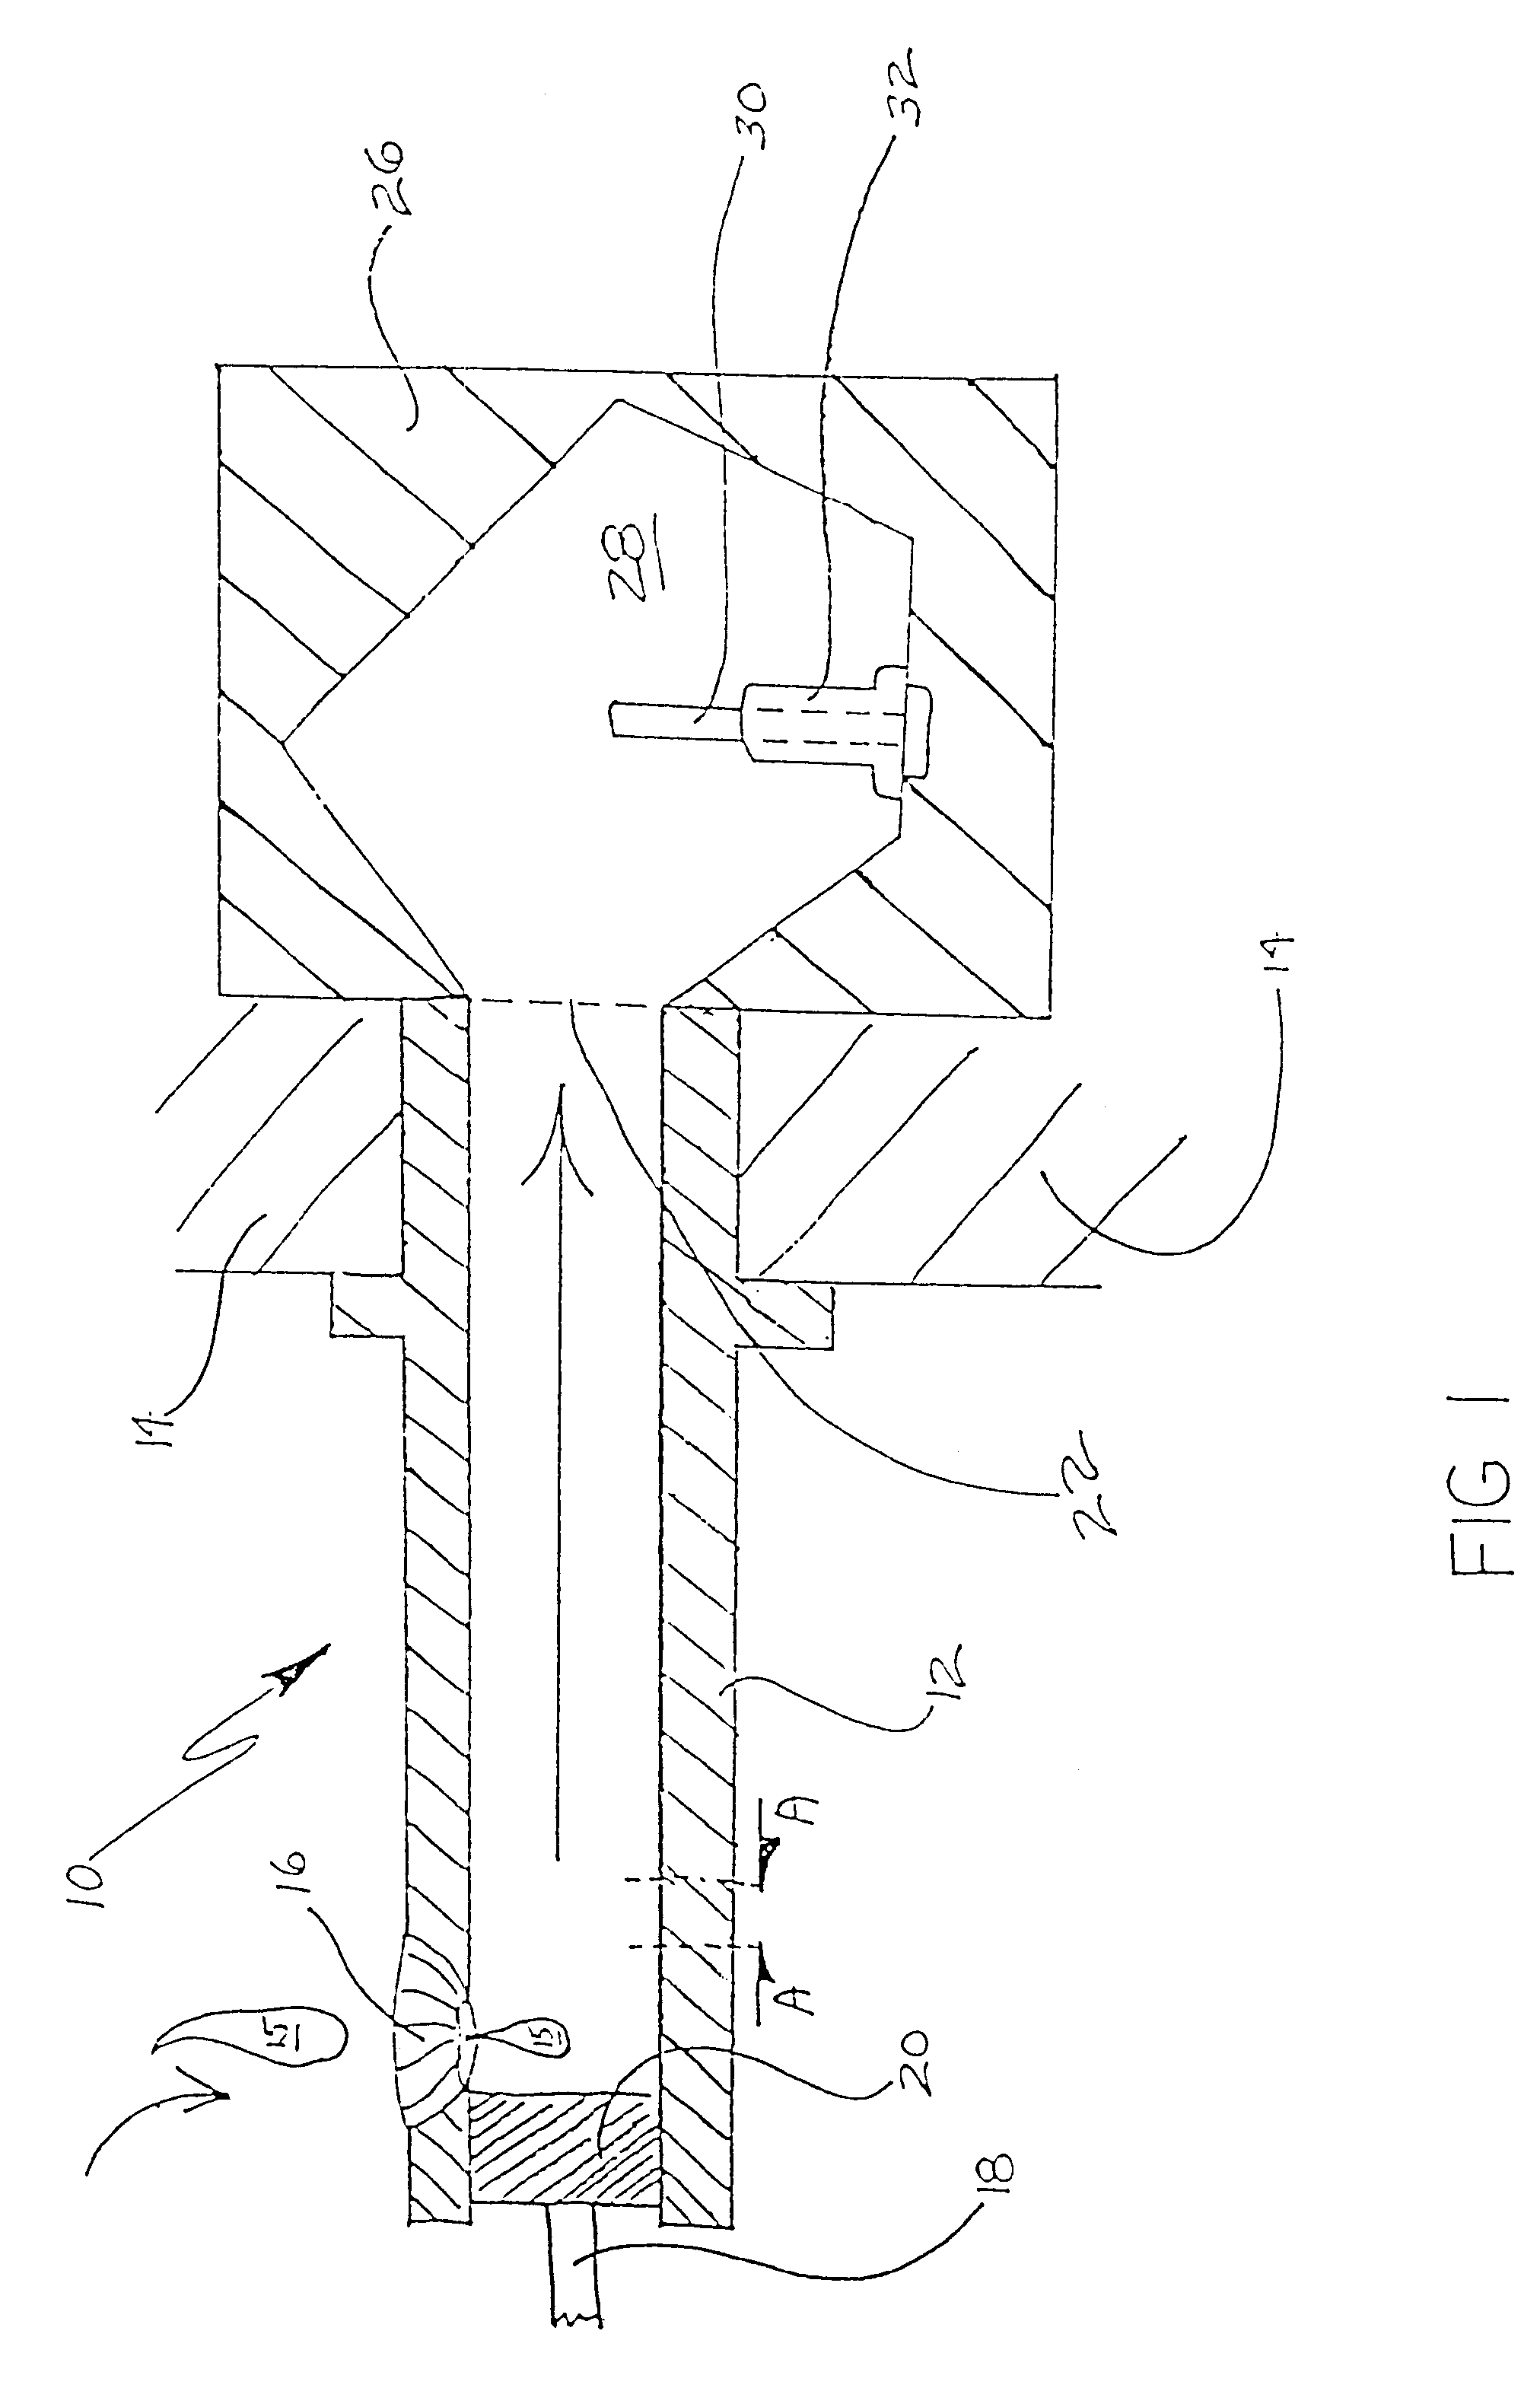 Material for die casting tooling components, method for making same, and tooling components made from the material and process